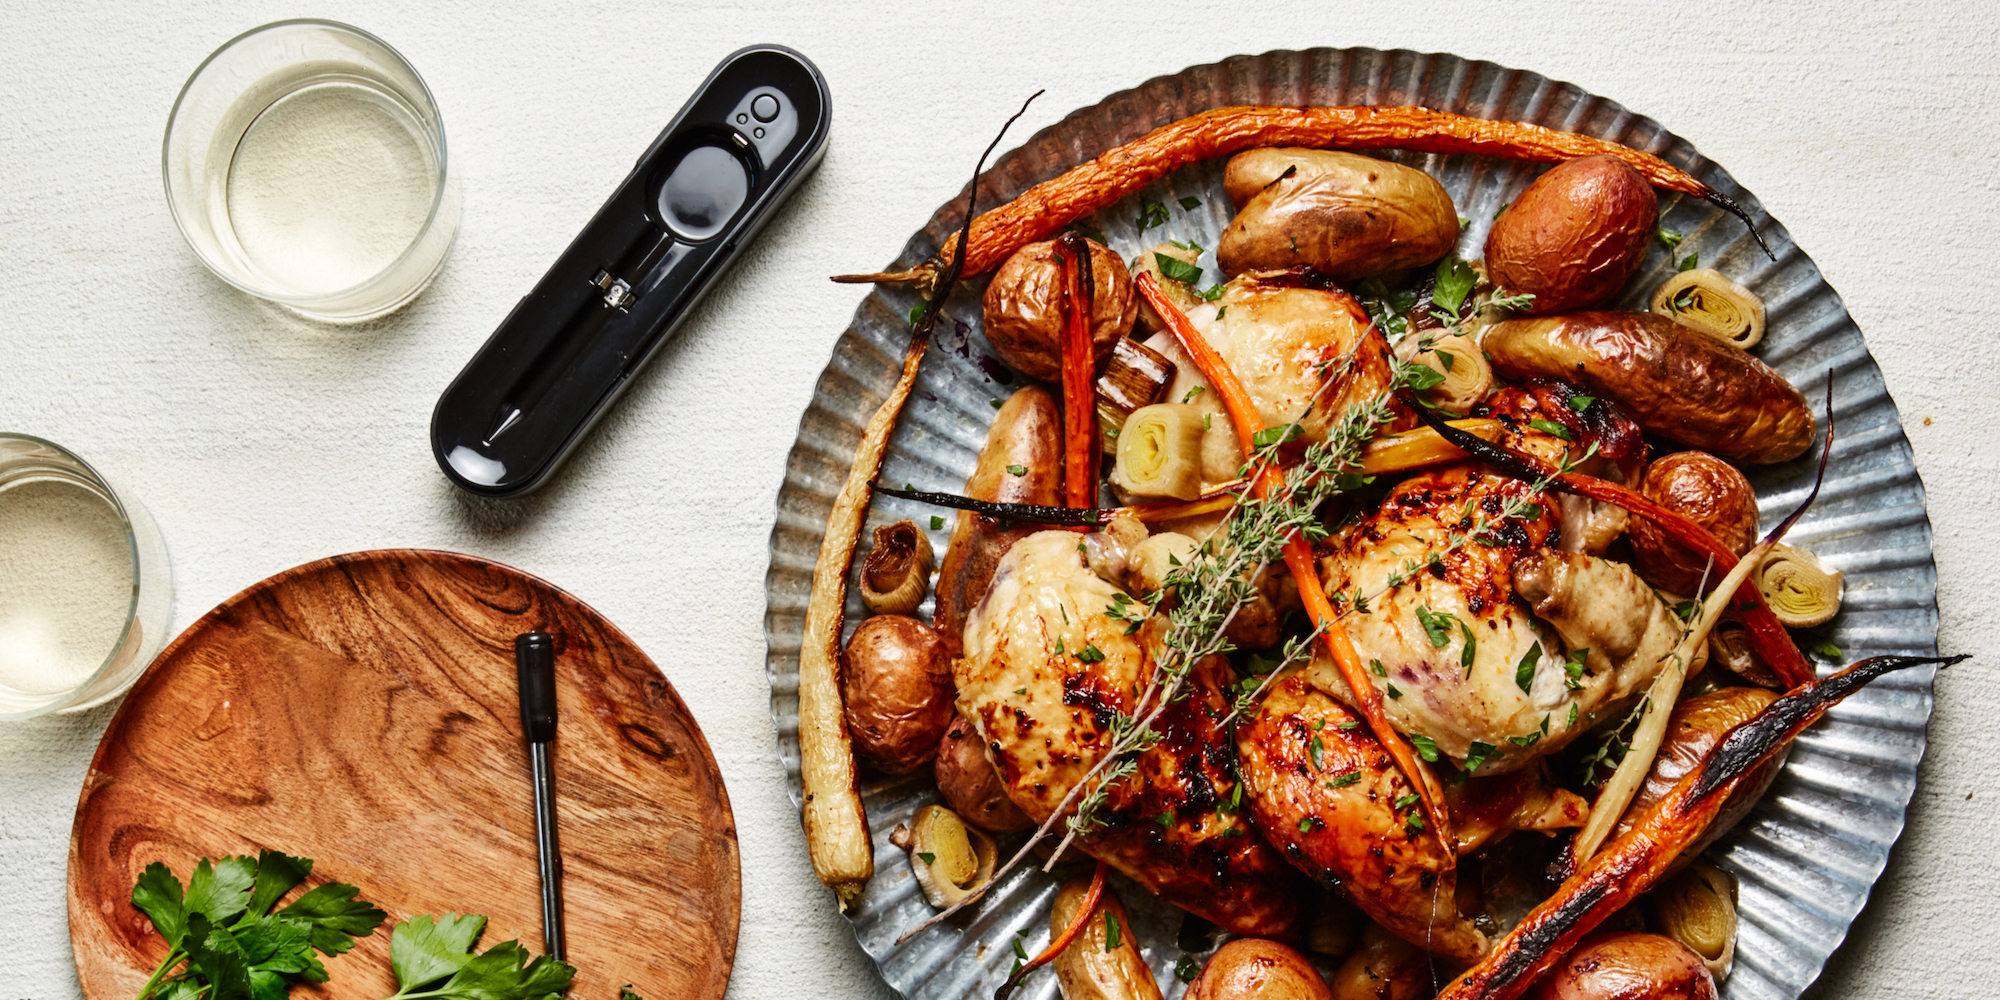 https://9to5toys.com/wp-content/uploads/sites/5/2022/05/Yummly-Meat-Thermometer-deal.jpeg